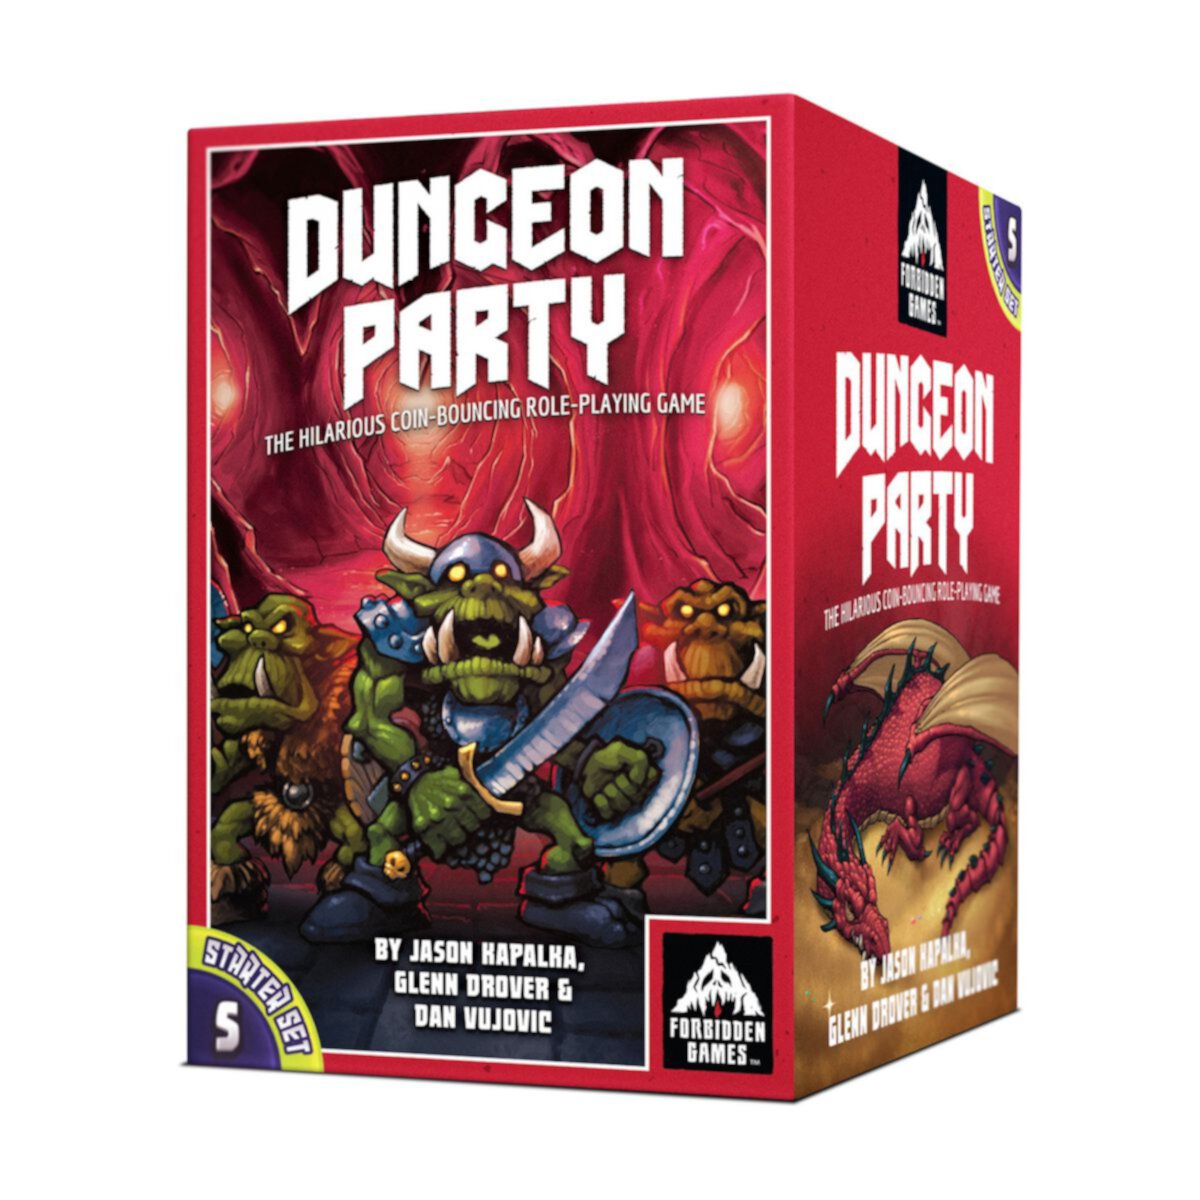 Front Porch Games Dungeon Party - Starter Set Front Porch Games